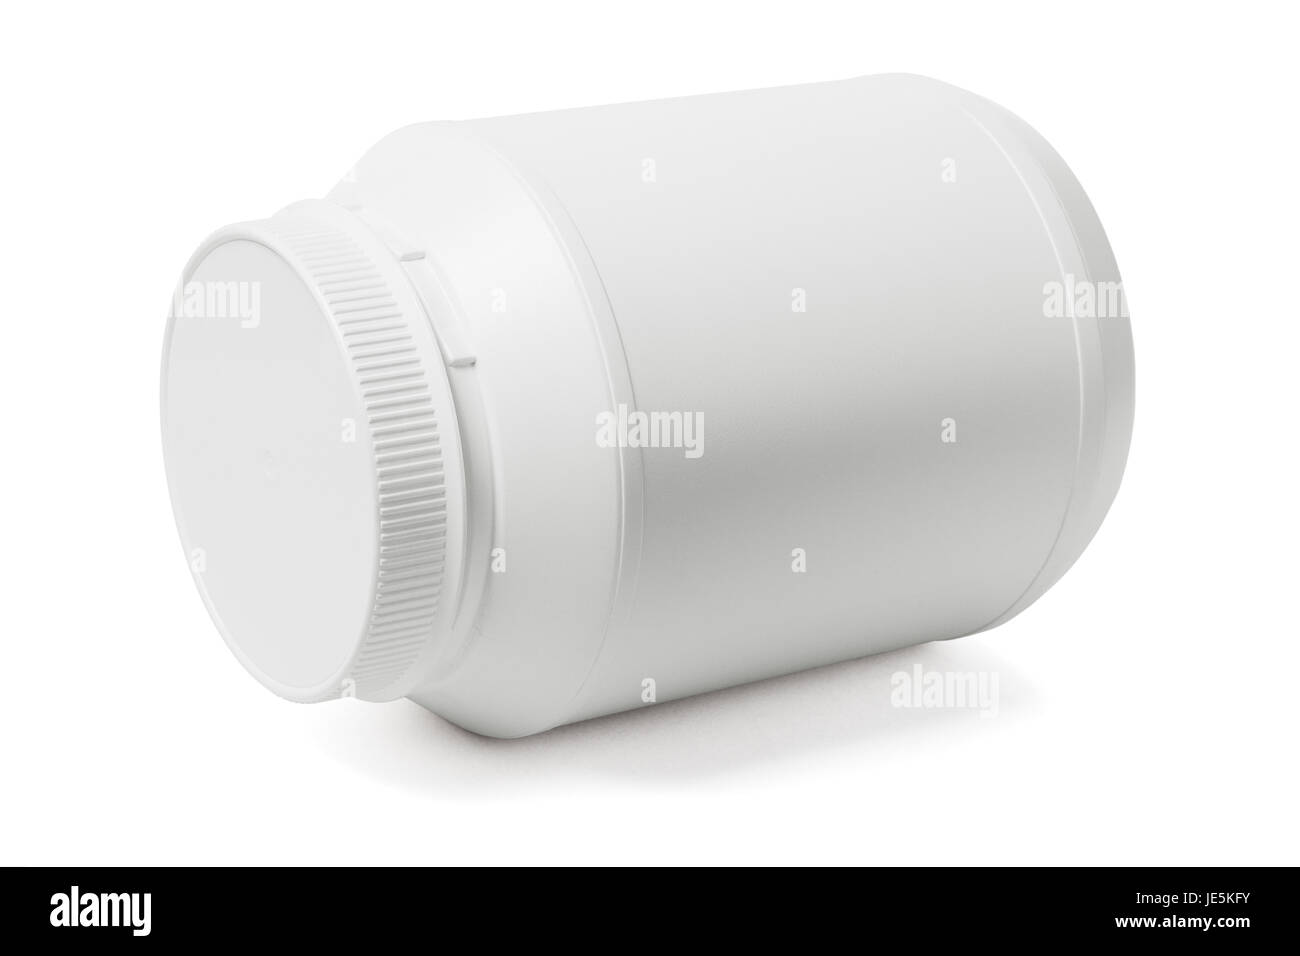 Large Round Plastic Container Lying on White Background Stock Photo